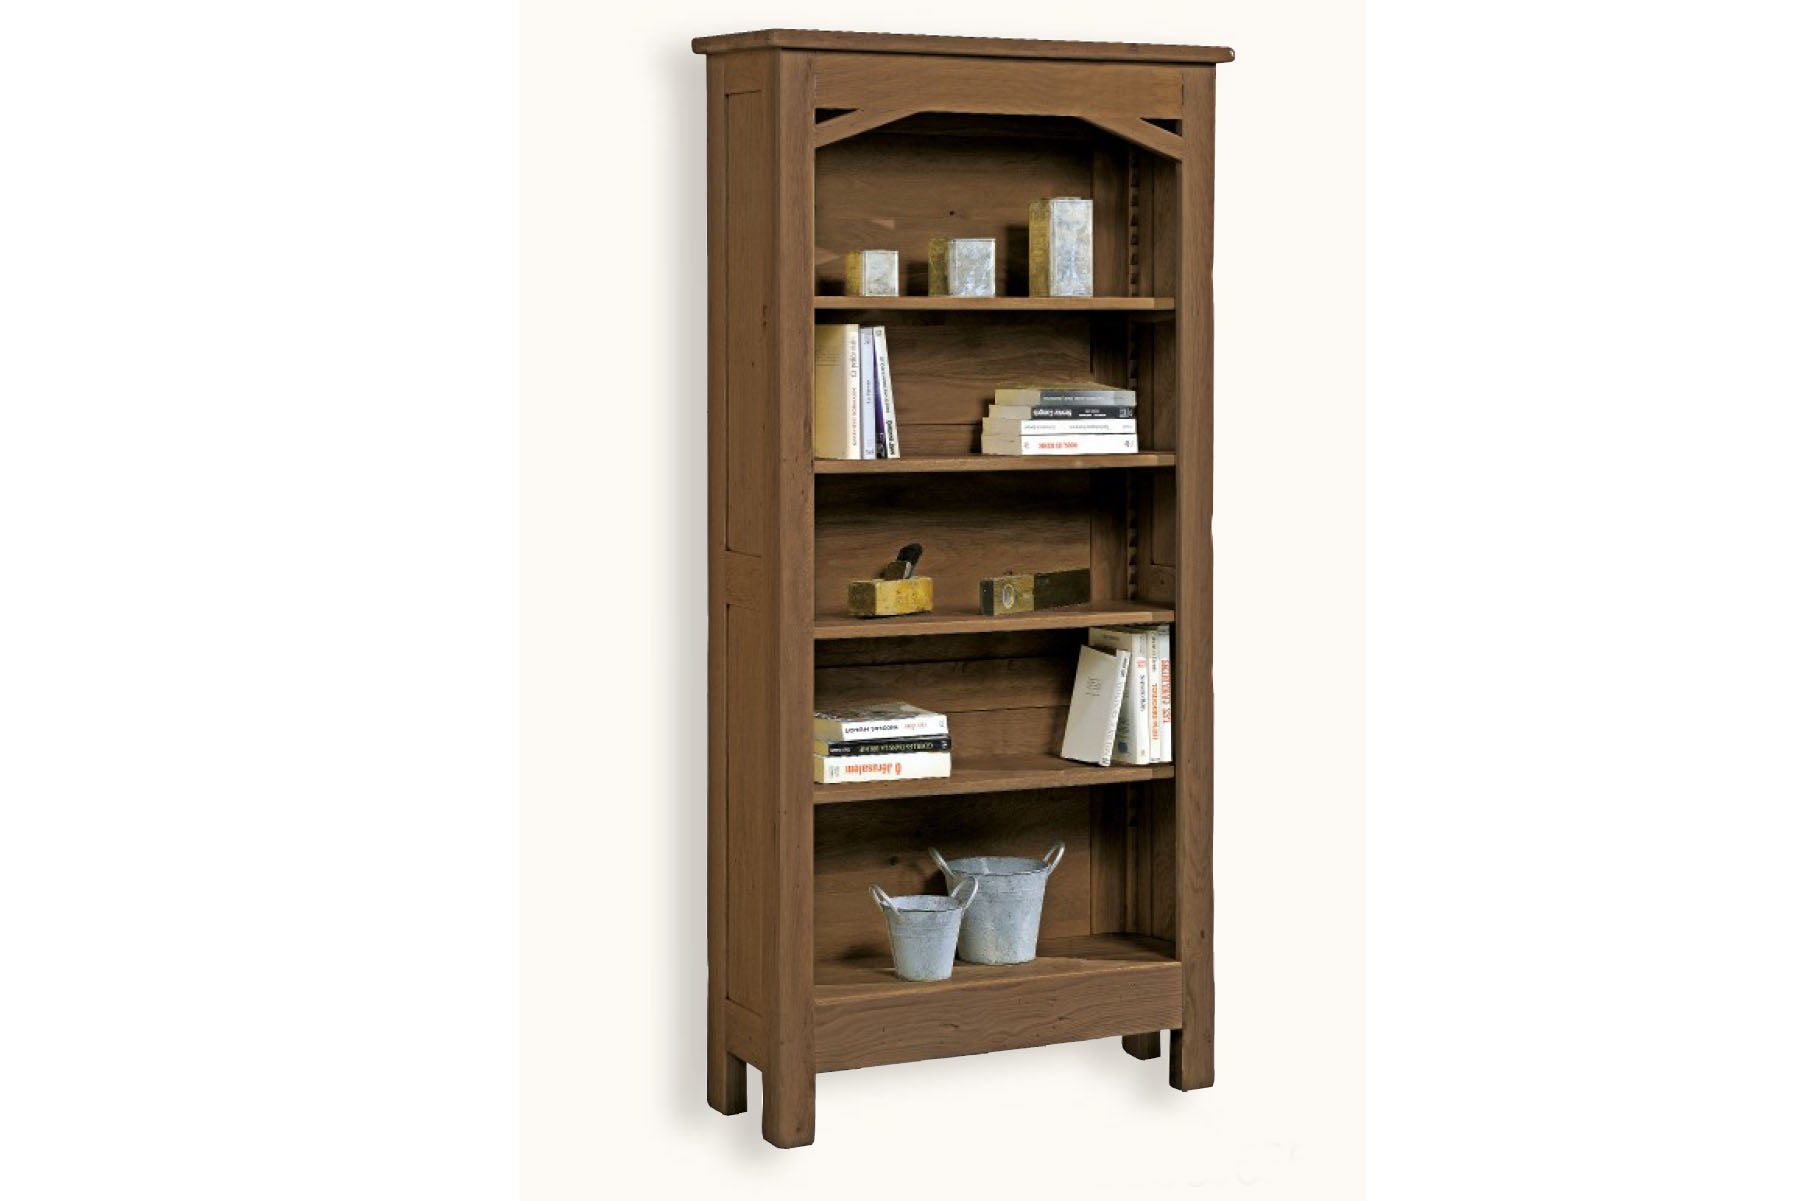 French Mountain Oak Alpine Range Bookcase Wide And Tall